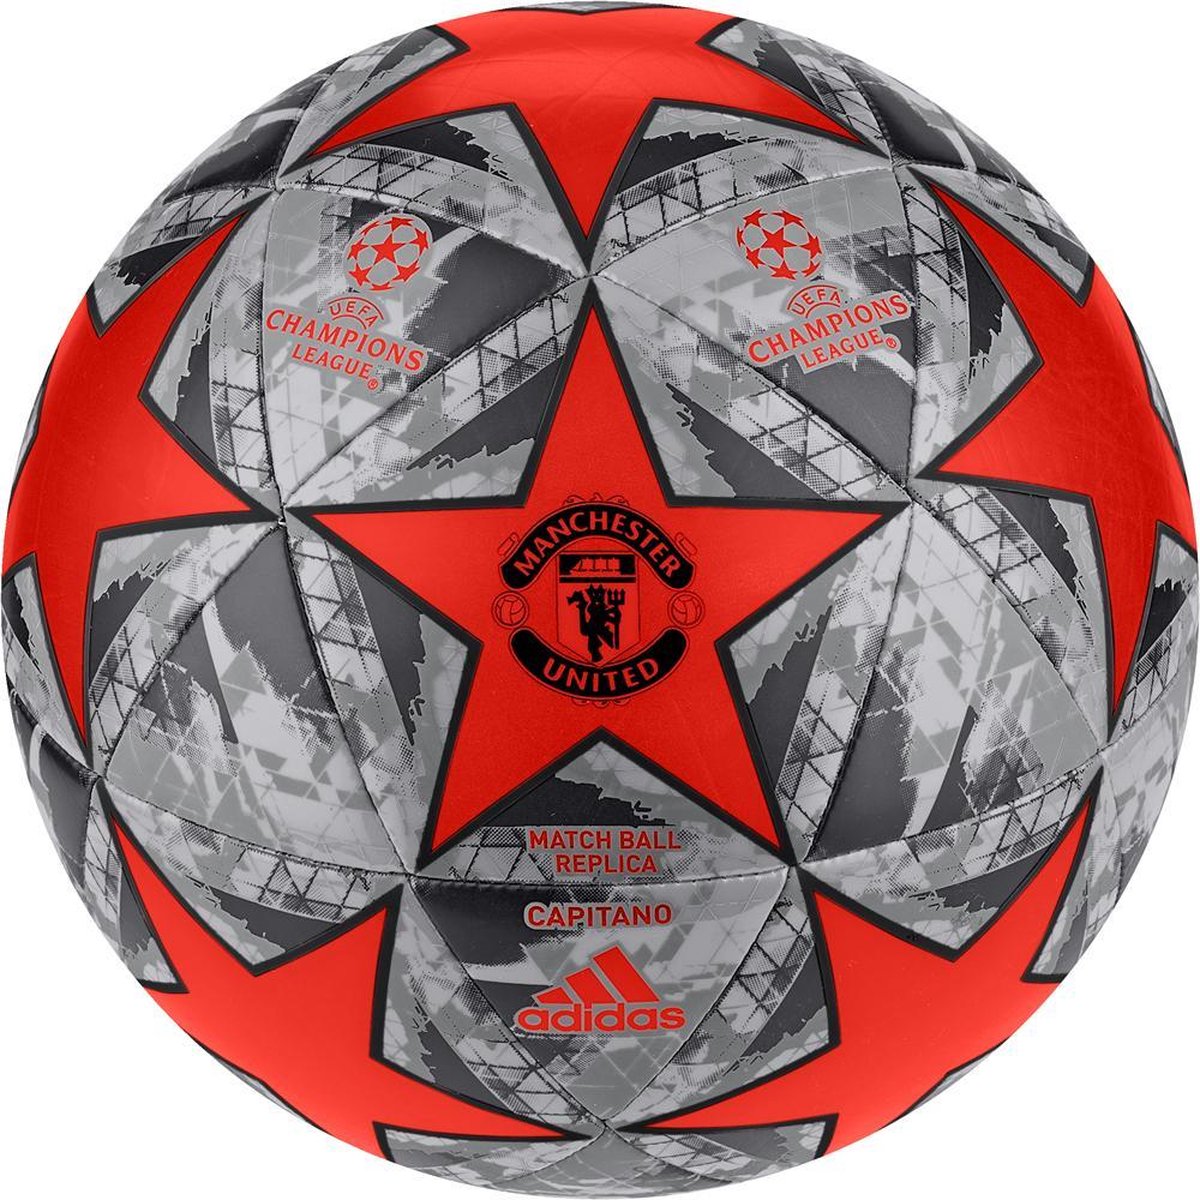 Mens bad wrijving Manchester United Voetbal - Adidas - Champions League - Maat 5 | bol.com